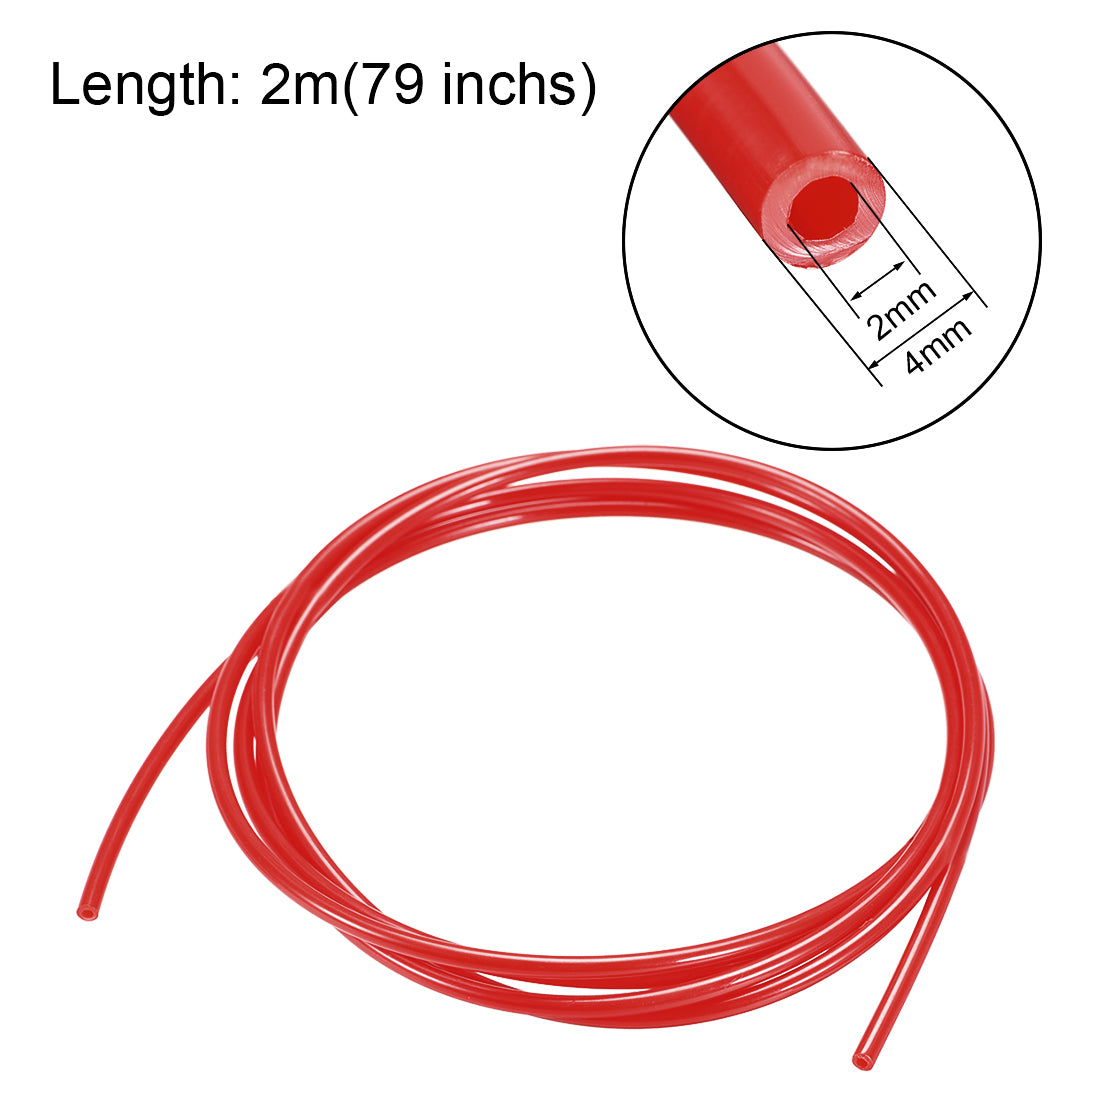 Uxcell Uxcell 4mm OD 2mm ID 2m Long PA12 Nylon Tube for Air Line Brake Fluid Transfer Red